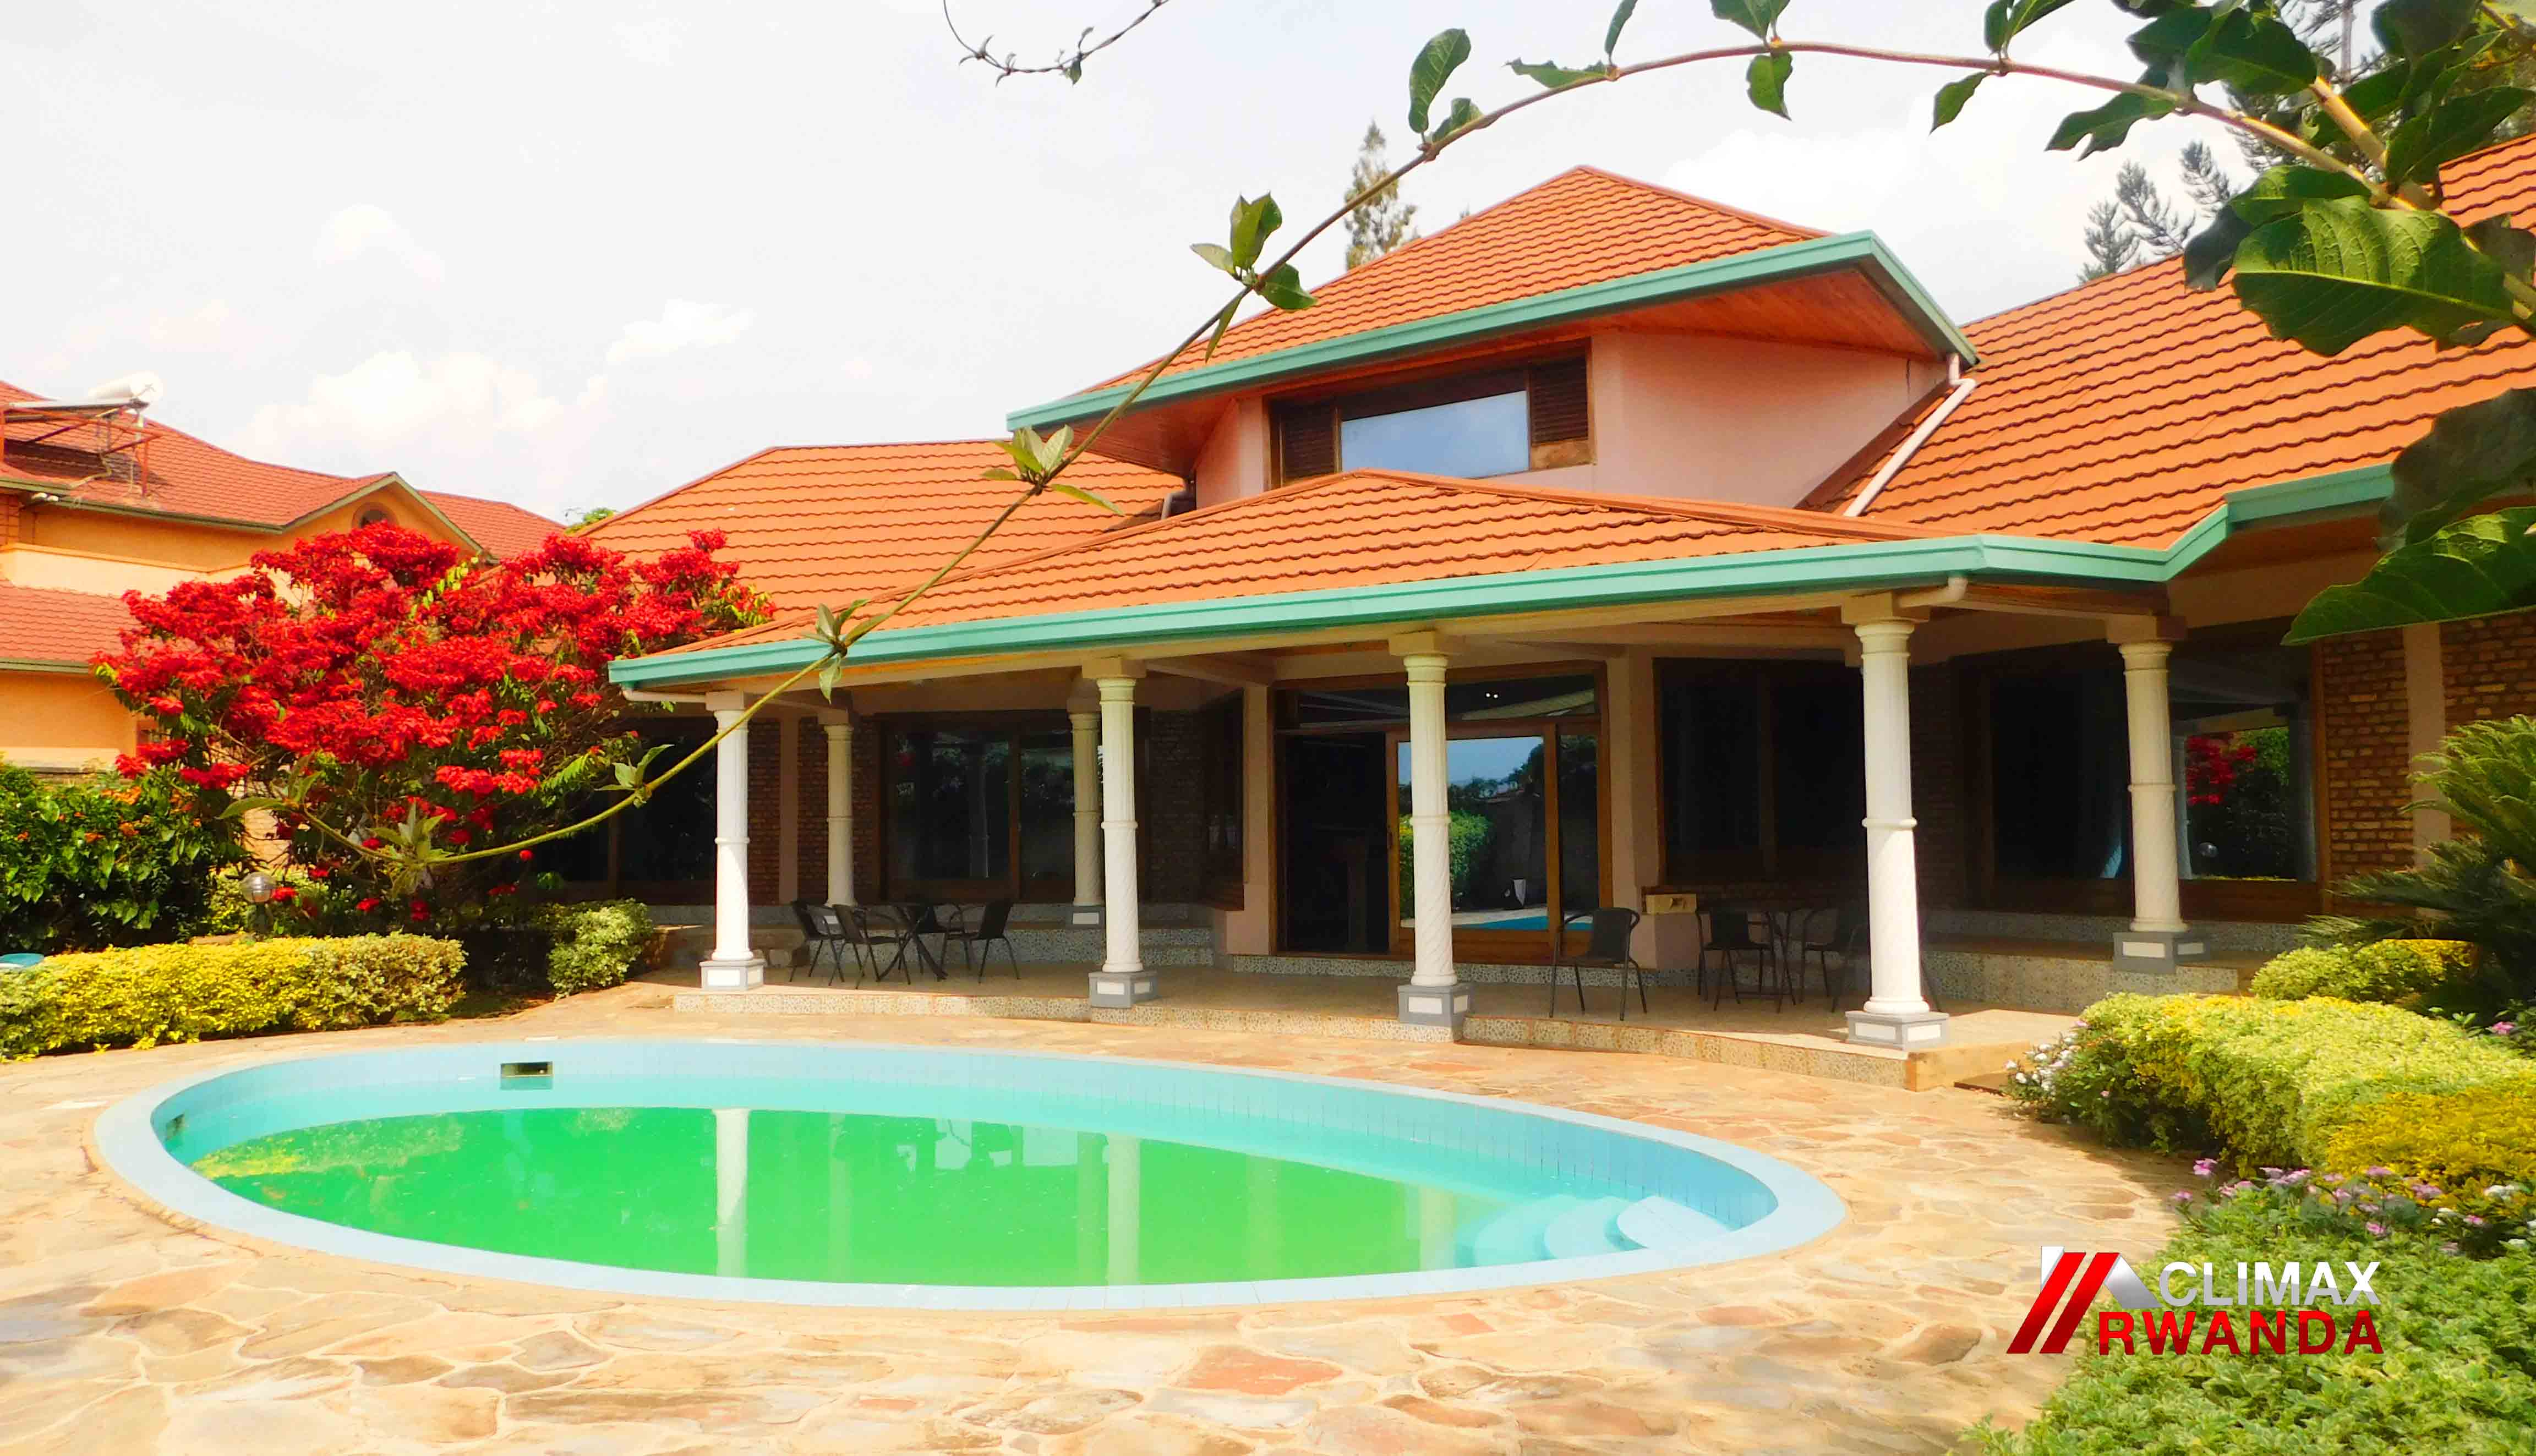 Beautiful Villa With swimming pool For Rent in Kagugu